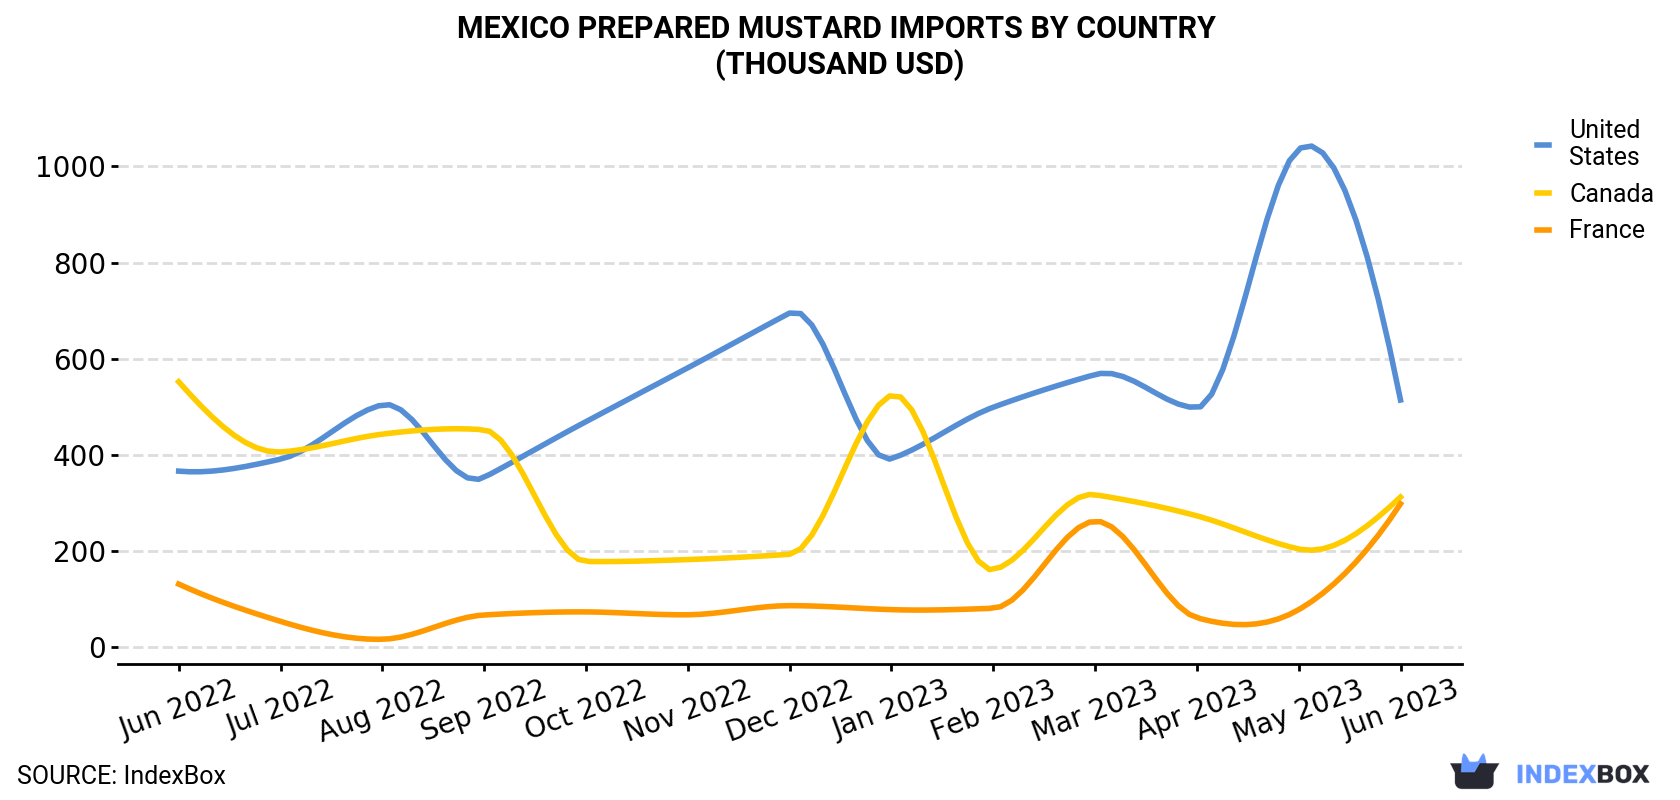 Mexico Prepared Mustard Imports By Country (Thousand USD)